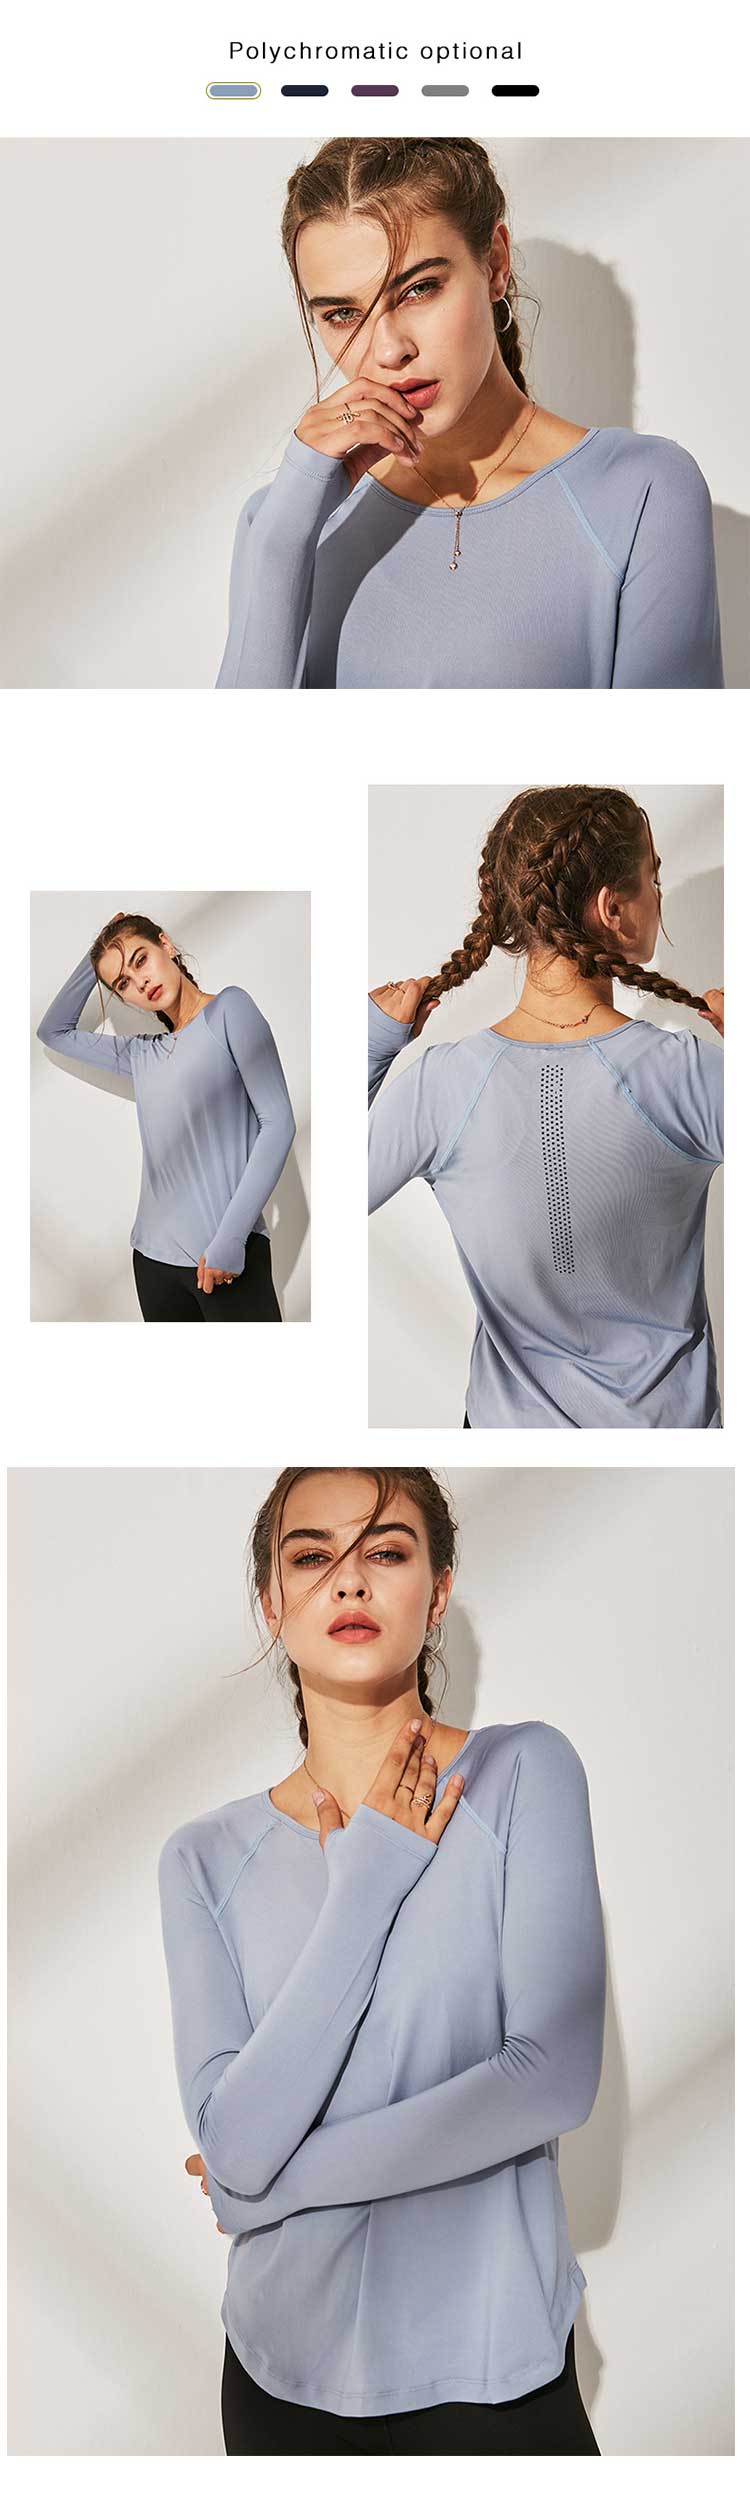 Round-collar-design,-leisure-while-fully-show-the-slender-neck-line.